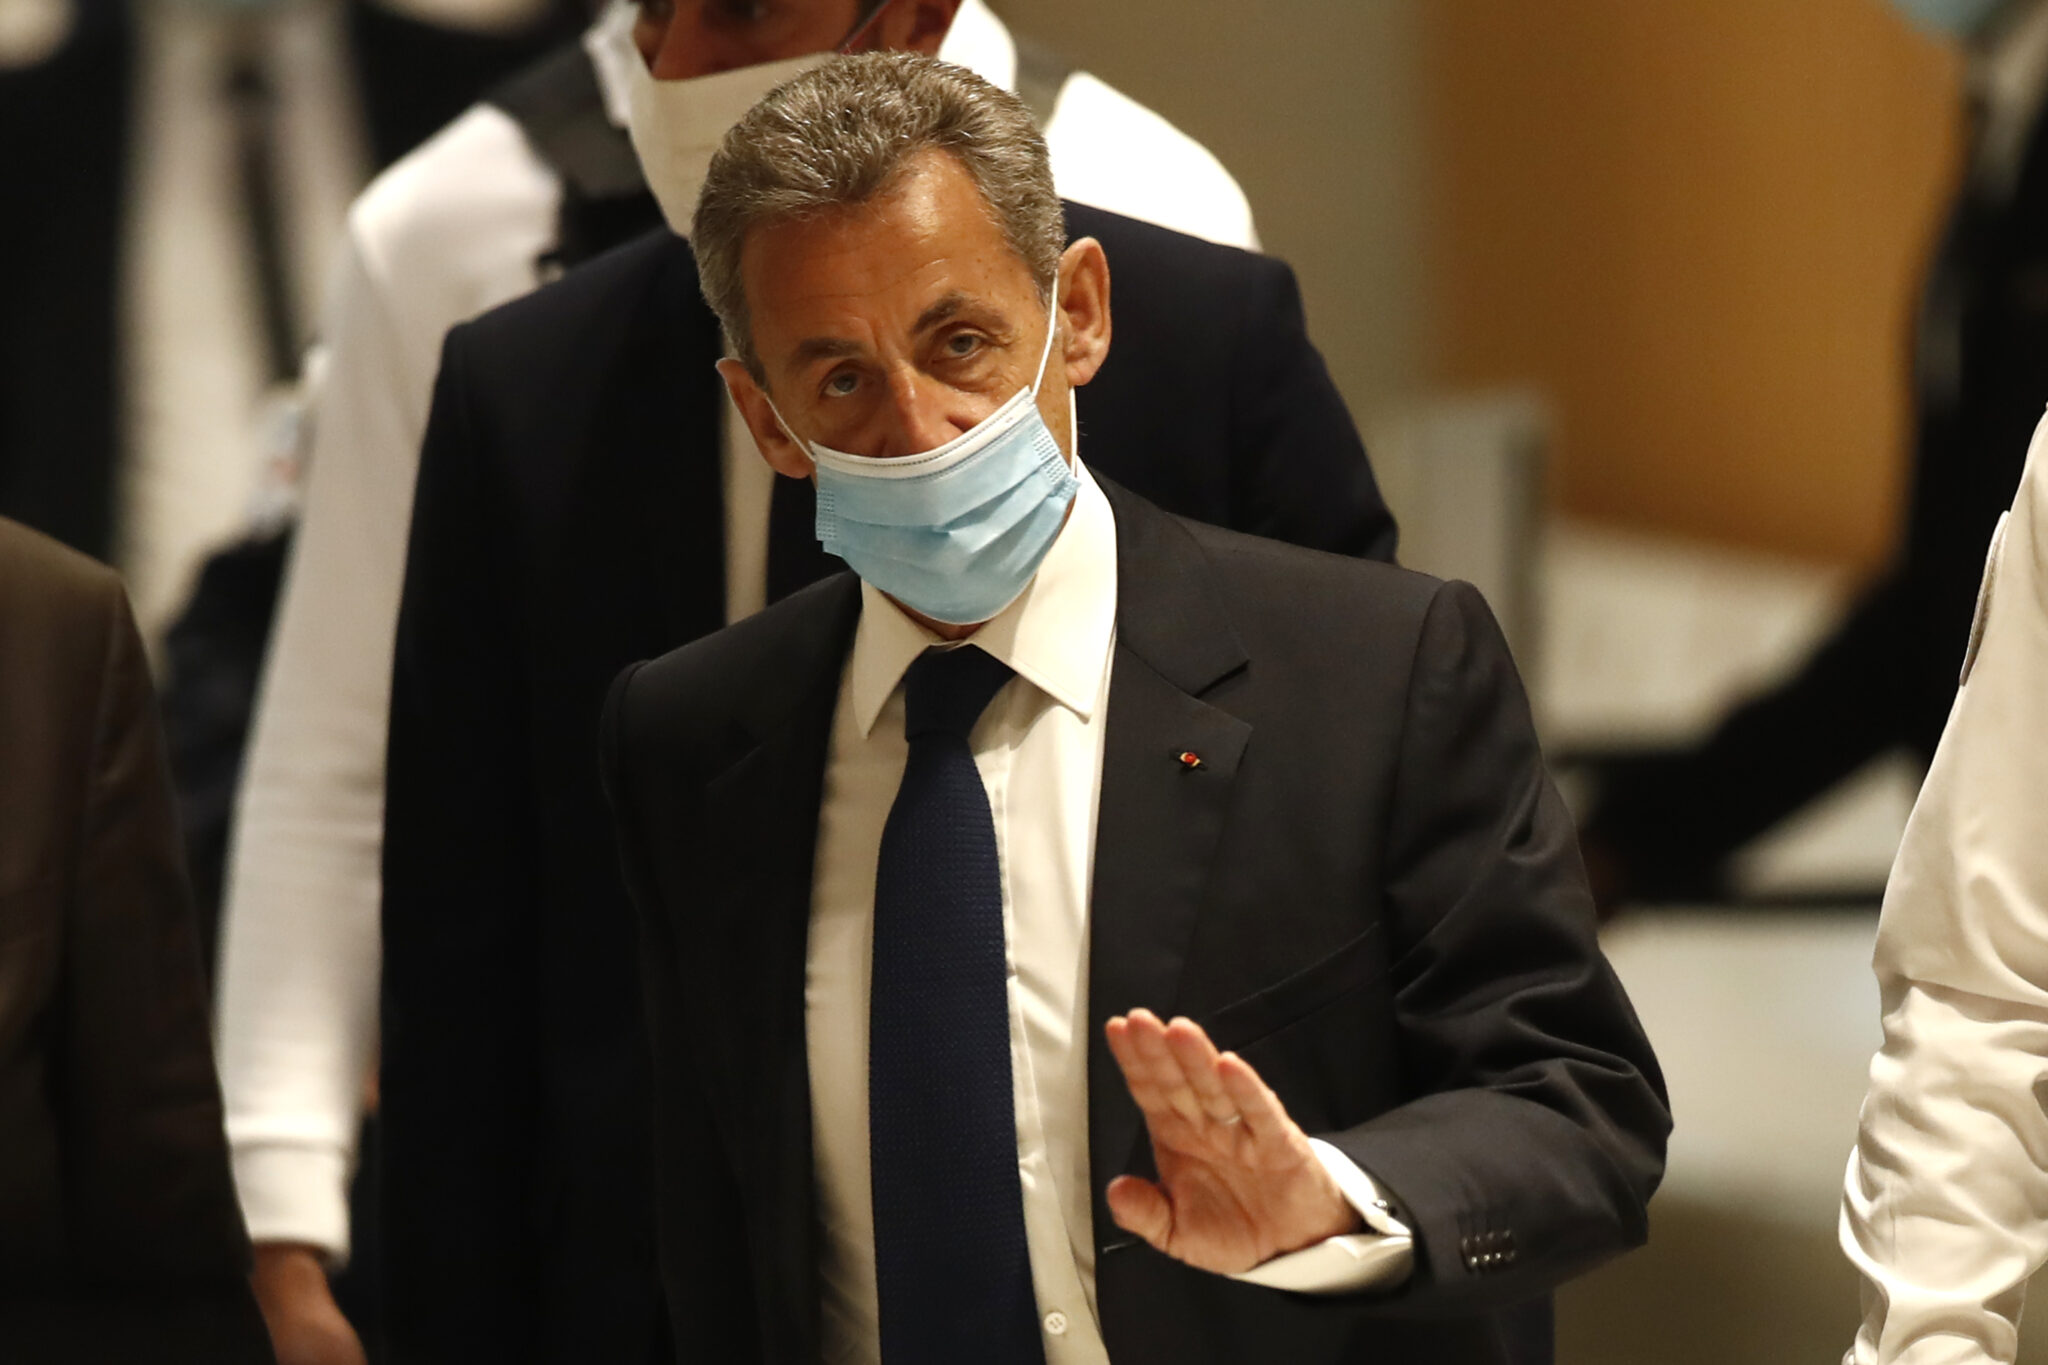 Former French President Sarkozy (66) must be behind bars